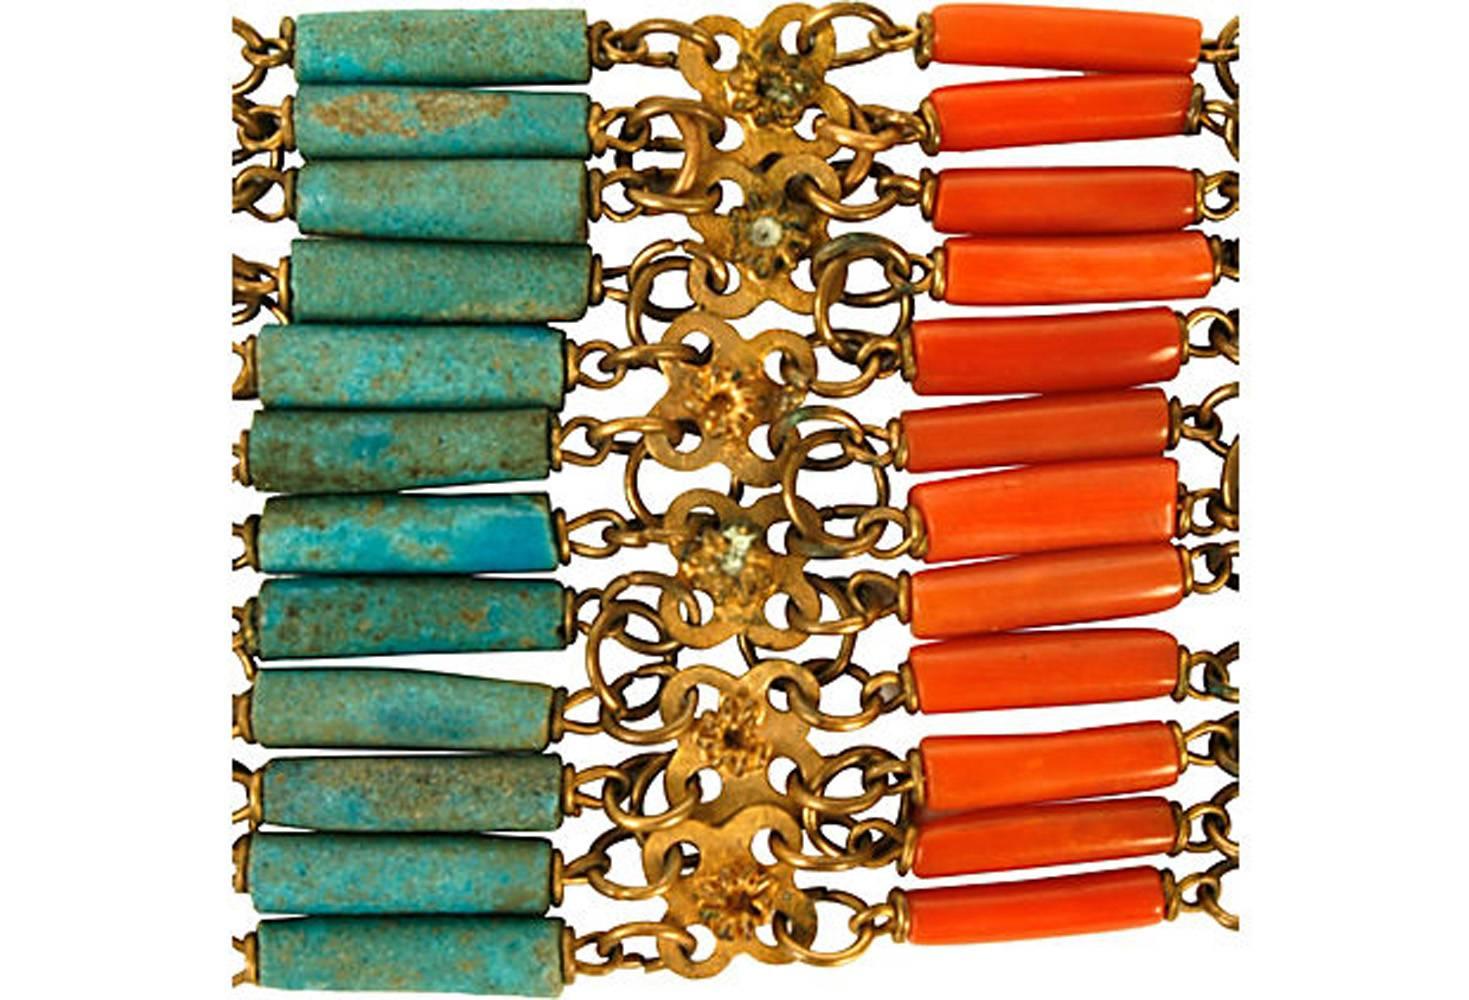 Chinese turquoise, coral, and vermeil filigree linked bracelet with vermeil clasp. No maker's mark.
N.P. Trent has been a respected name in antiques for over 30 years with a large collection of antique and vintage fashion and jewelry. 